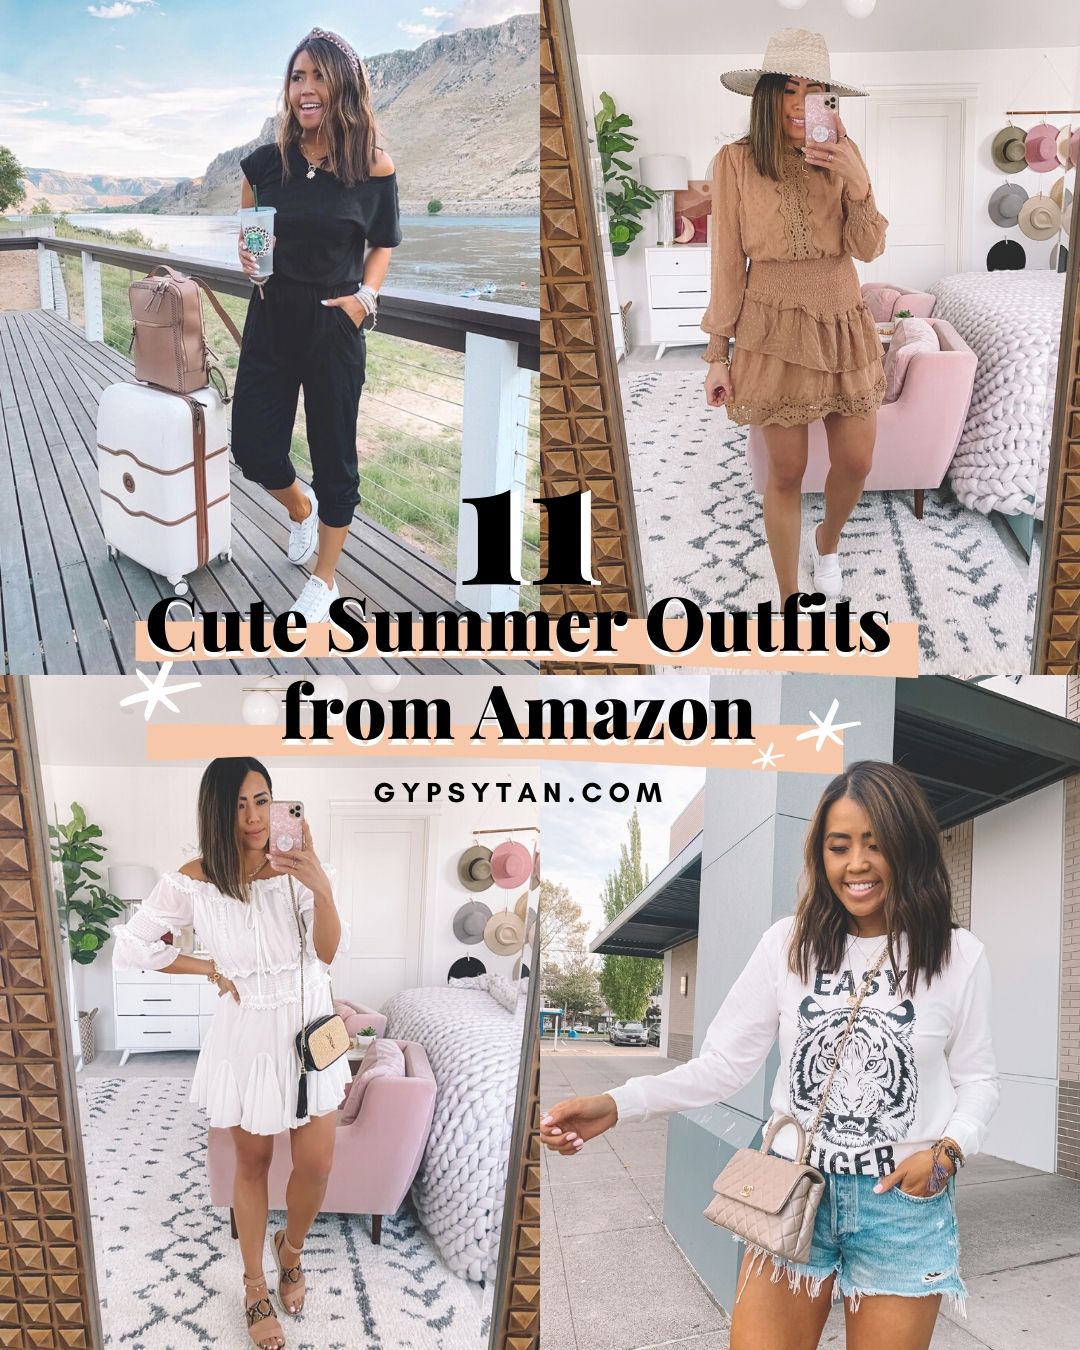 Favorite Summer Outfit, US fashion